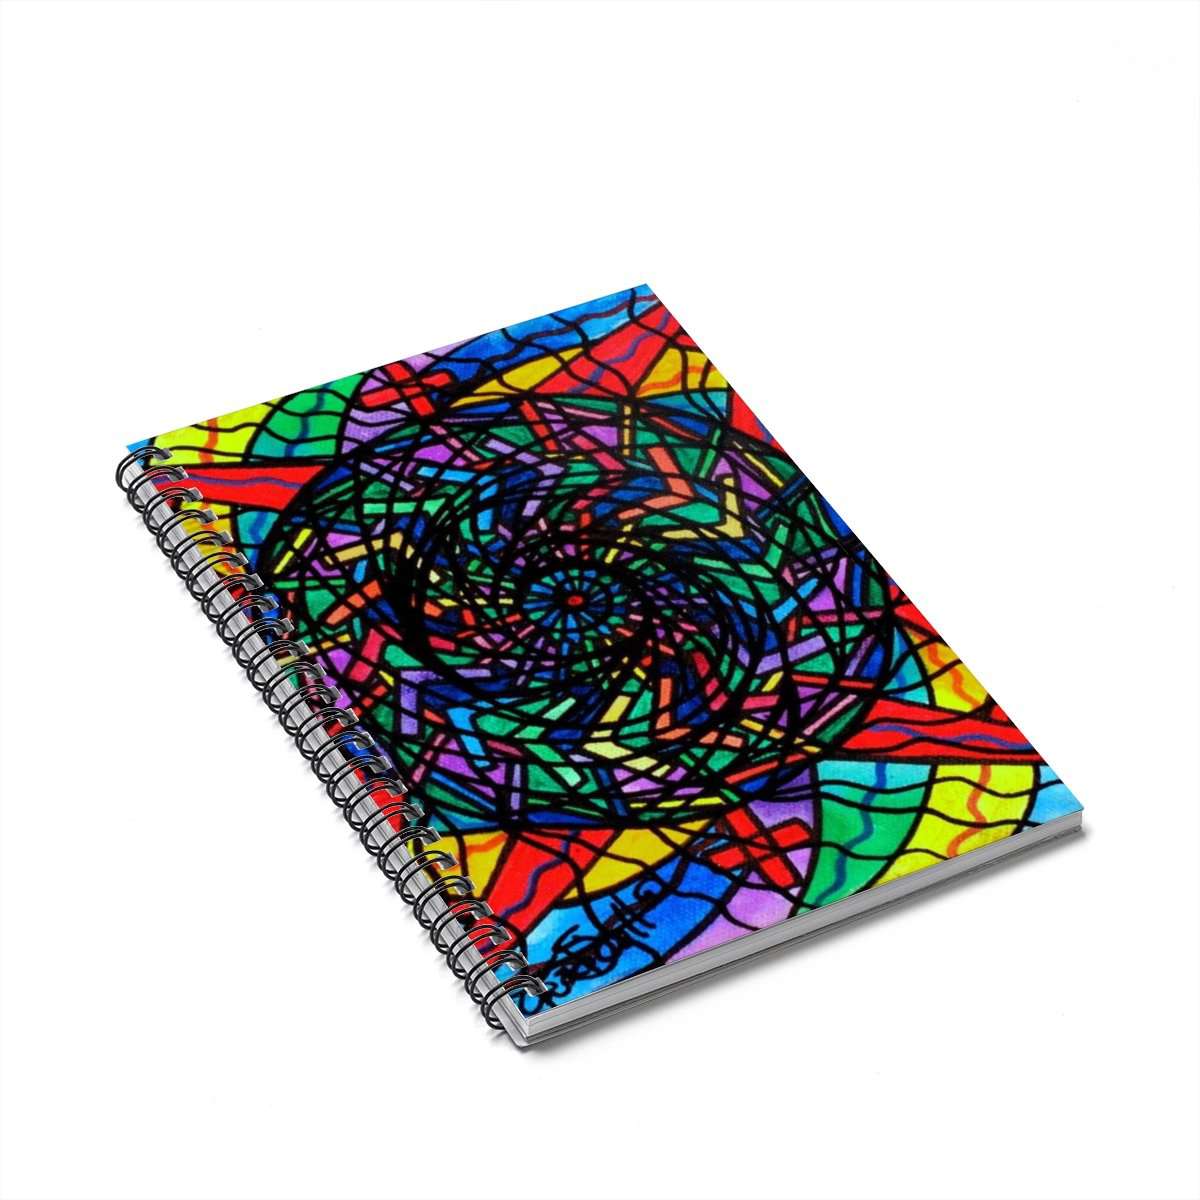 the-one-place-to-find-cheap-academic-fullfillment-spiral-notebook-online-sale_0.jpg